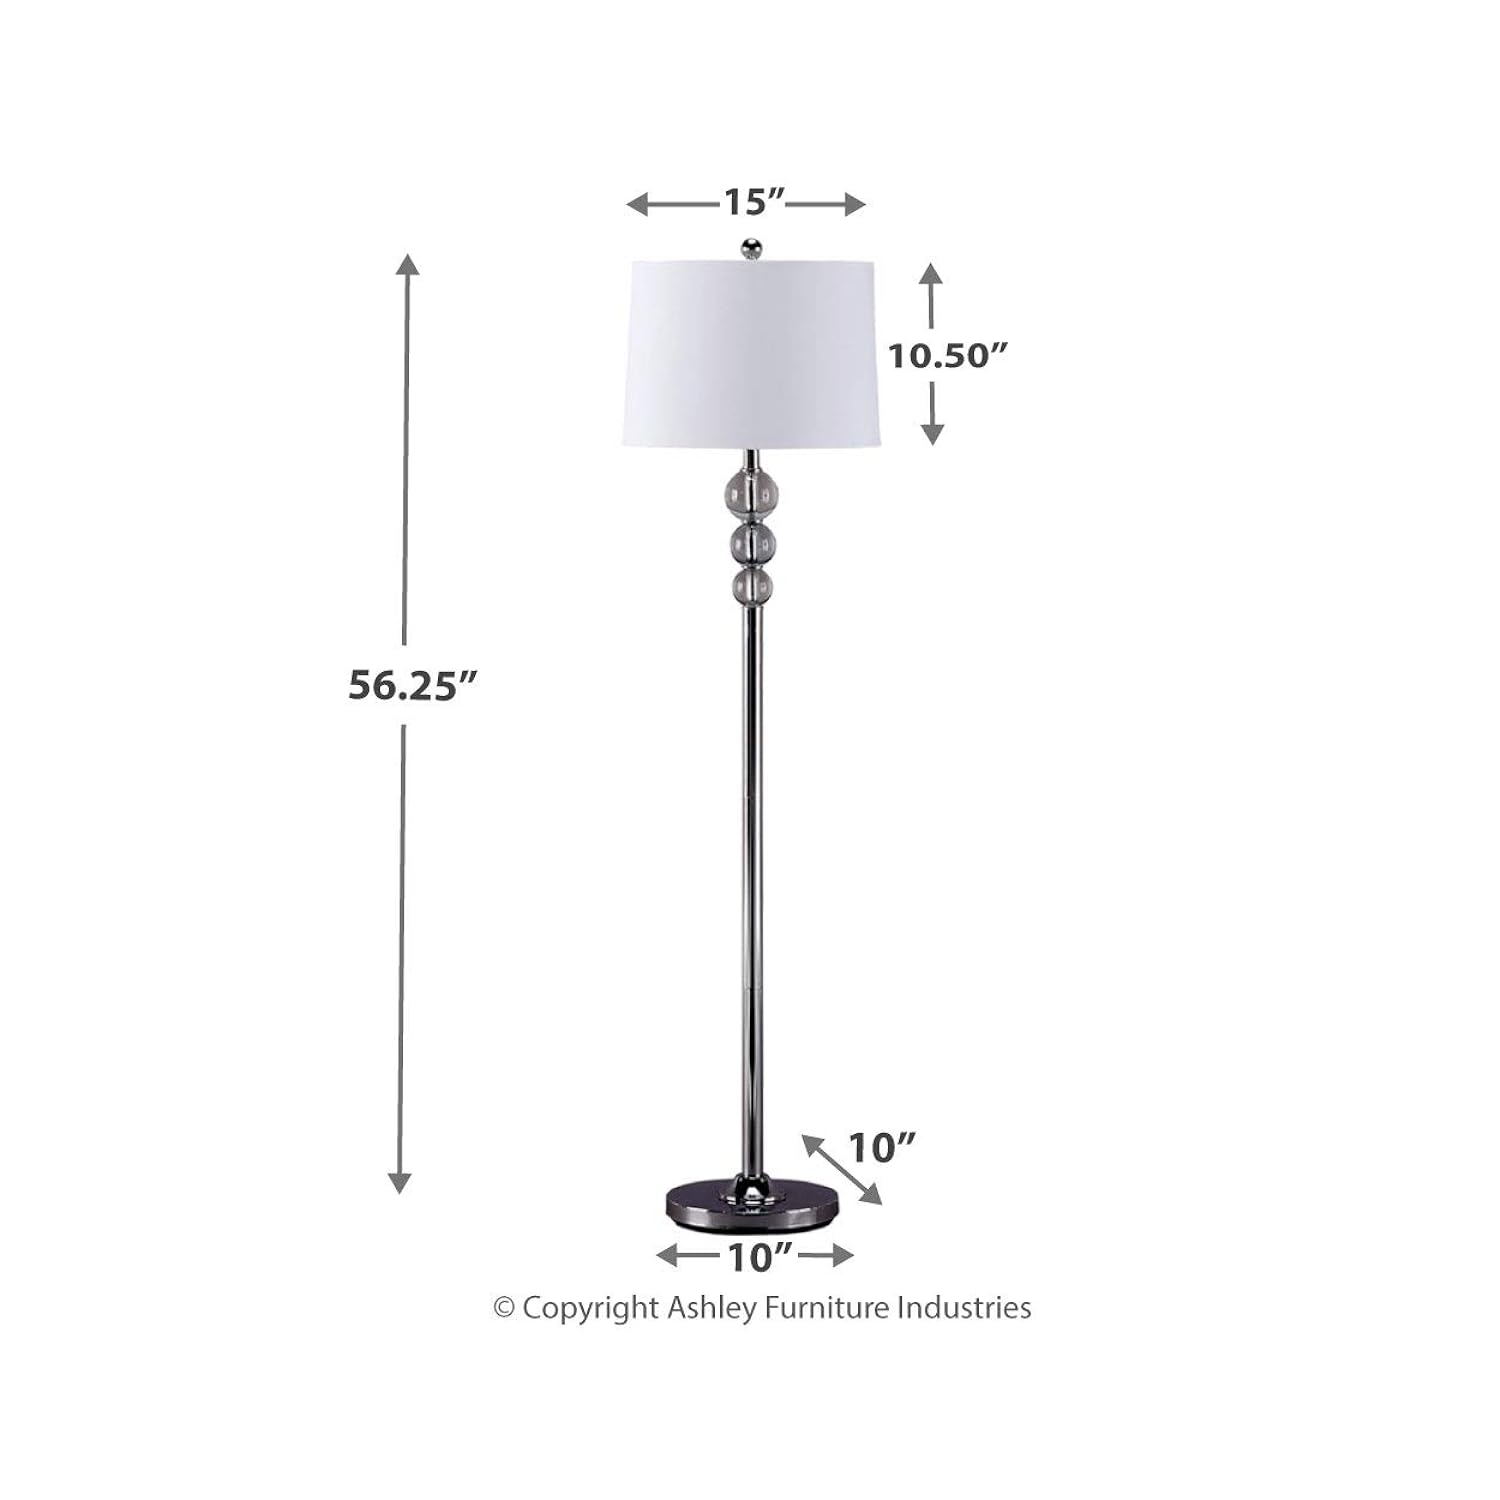 Ashley Signature Design by Ashley Joaquin Traditional 56.25" Crystal Accent Floor Lamp, Chrome